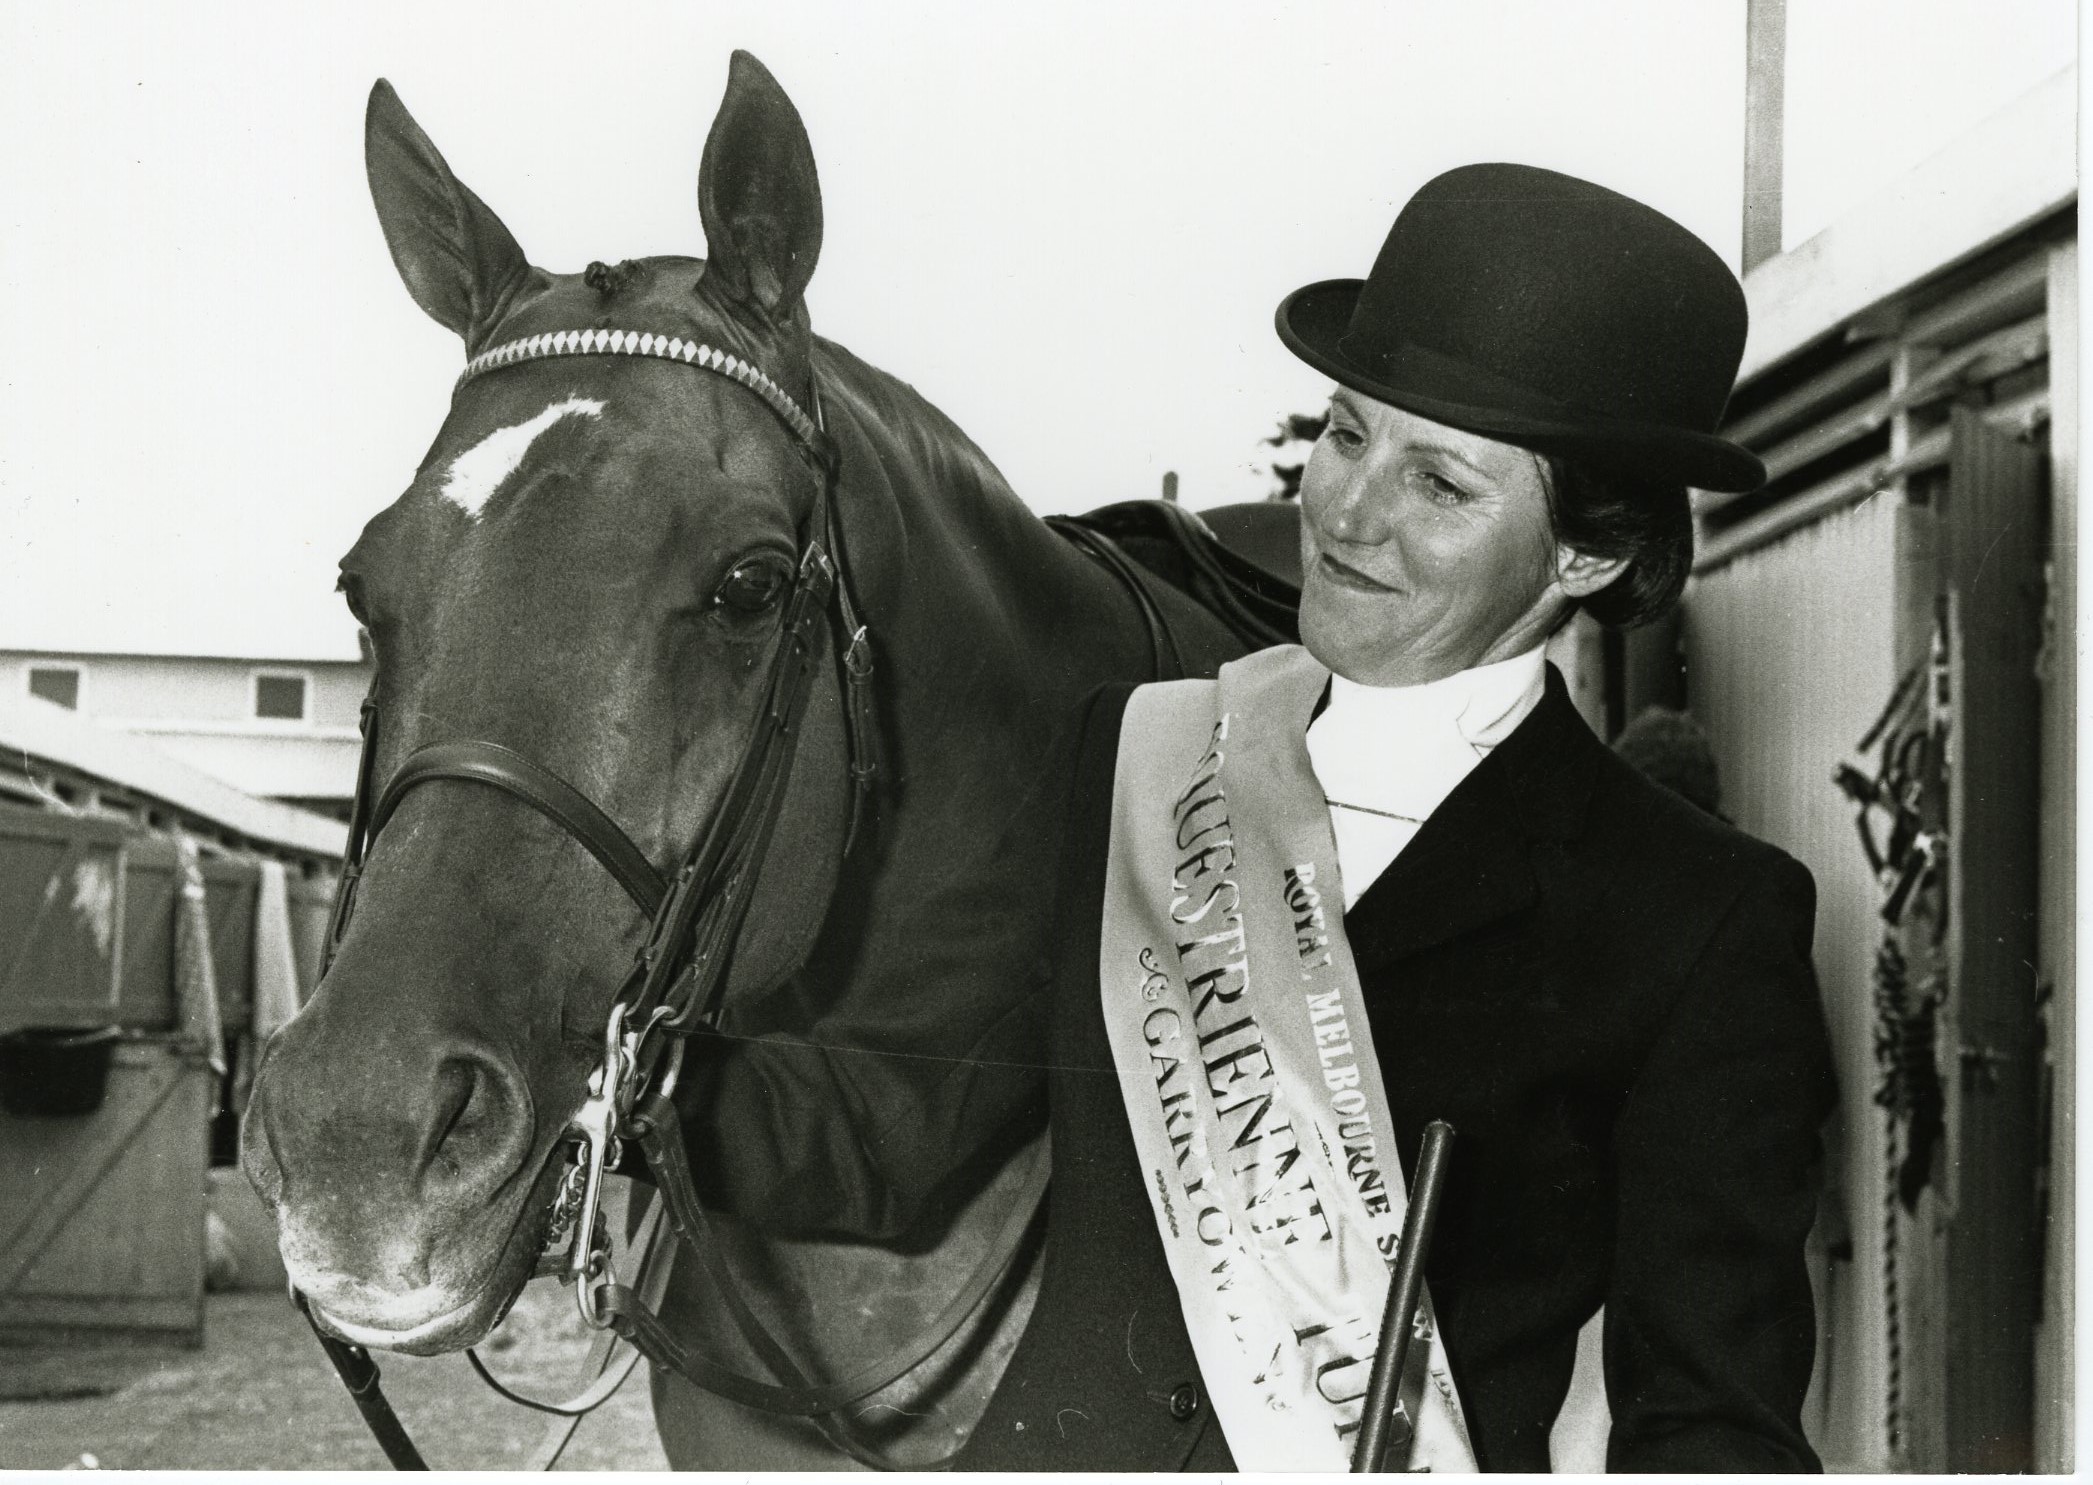 Vicky Lawrie with Breughel after her fourth Garryowen win, 1989. Photograph by Peter Leaver.